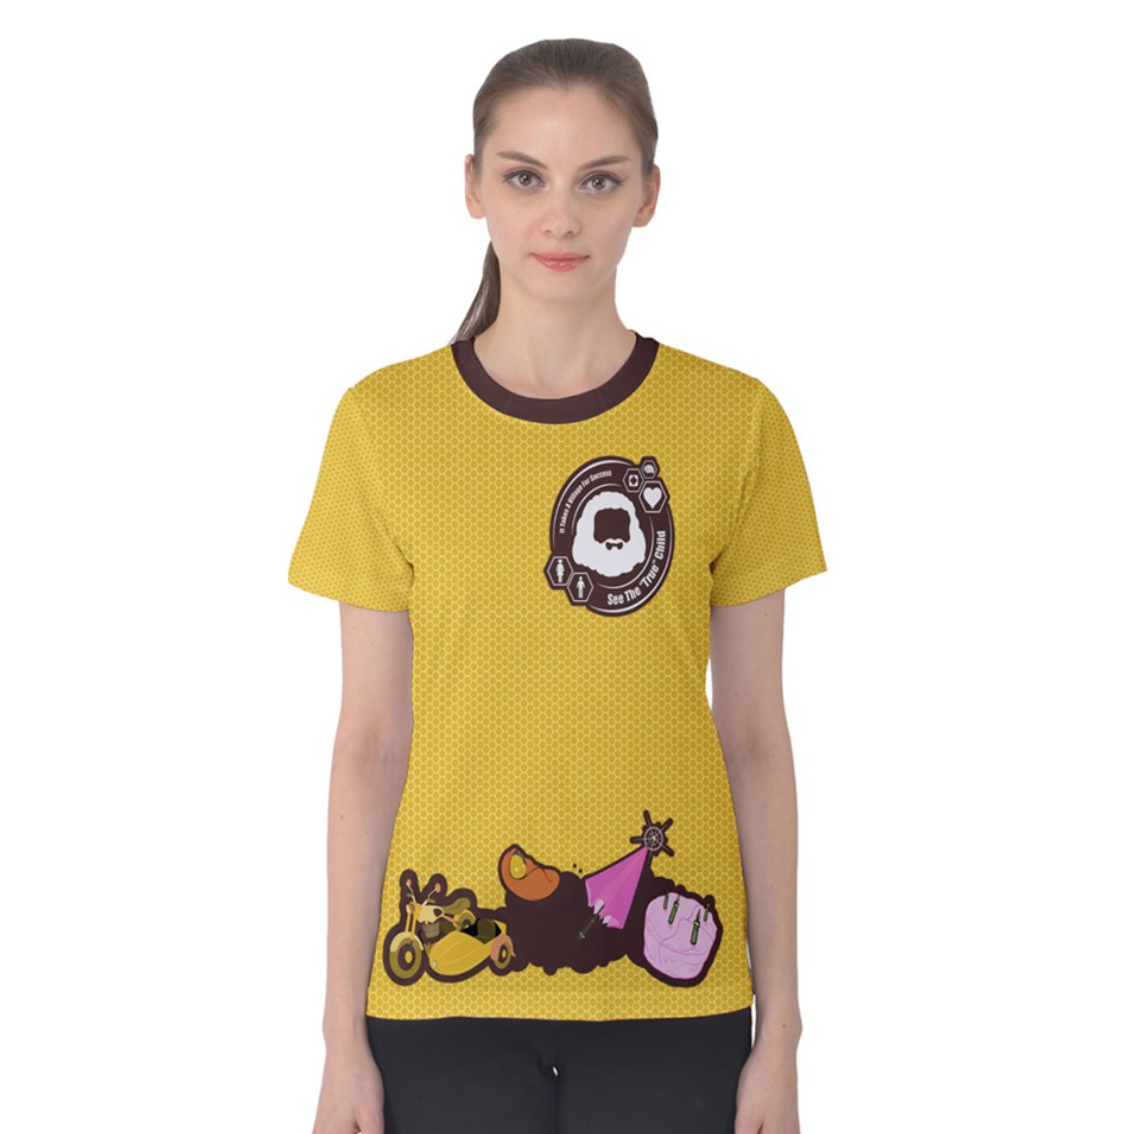 See The "TRUE" Child (Yellow) Women's Cotton Tee - Inspired by Literary Character, Hagrid